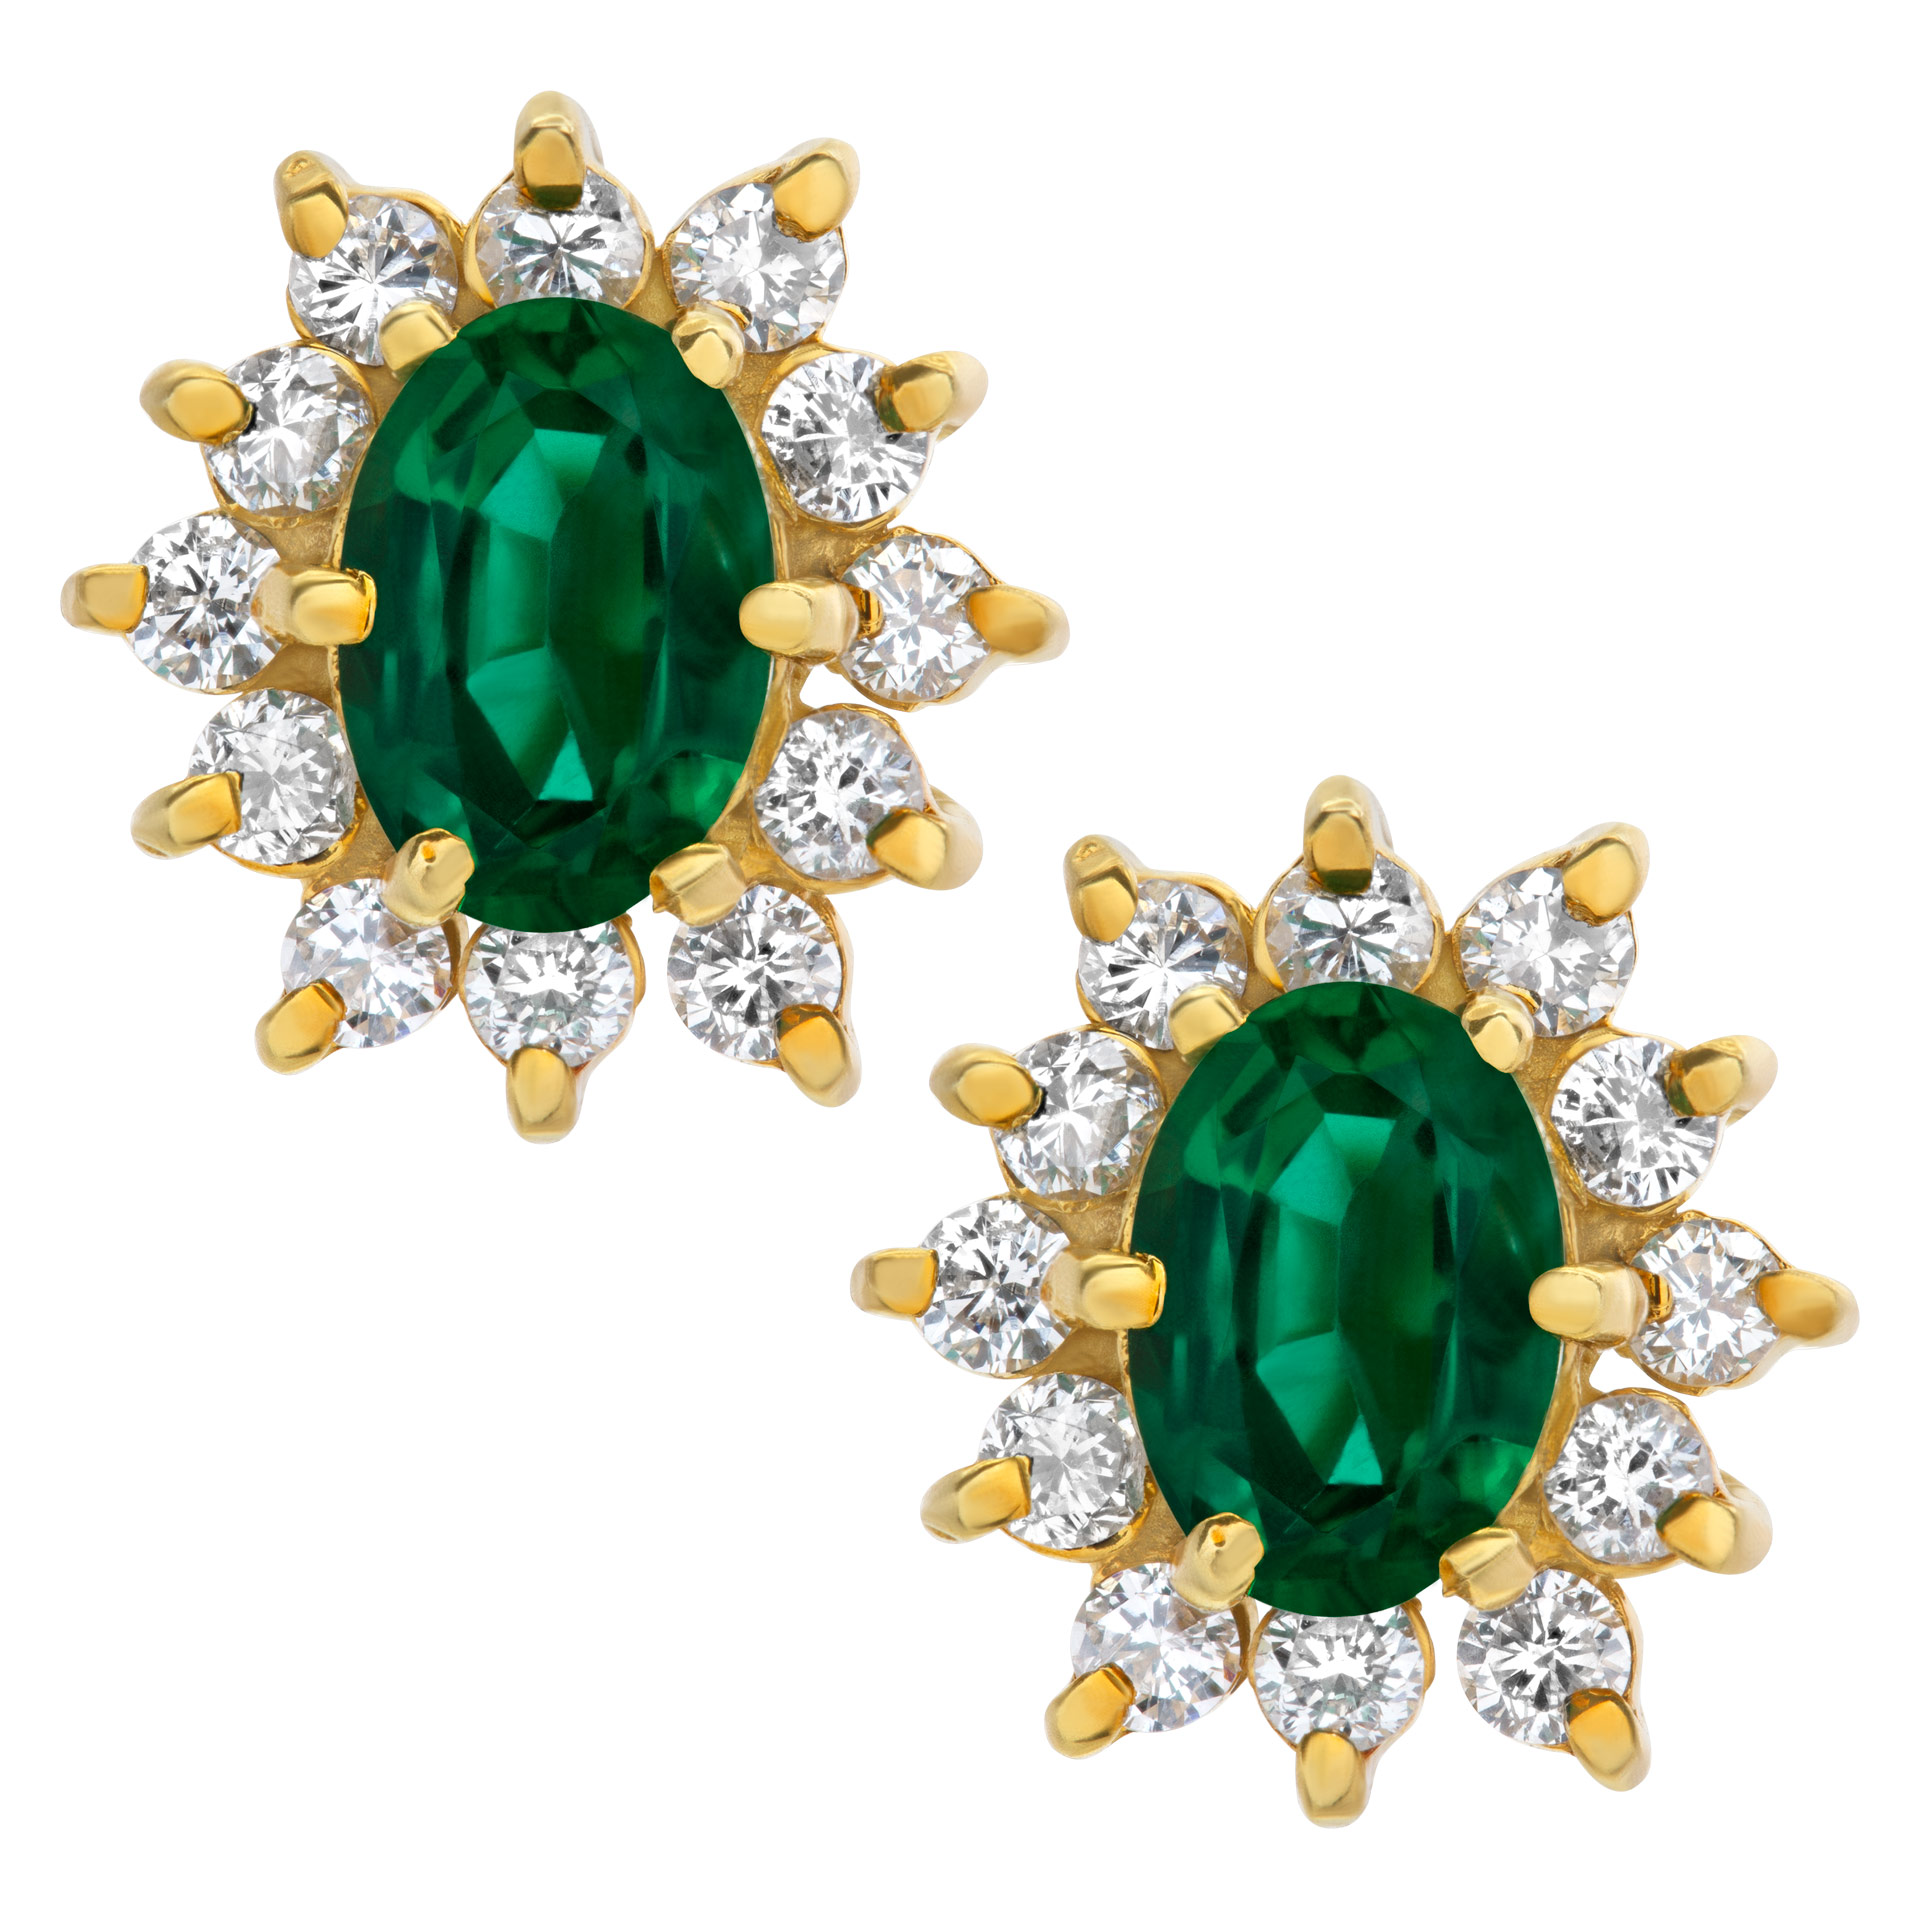 Diamond and Oval Emerald Earrings in 18k yellow gold